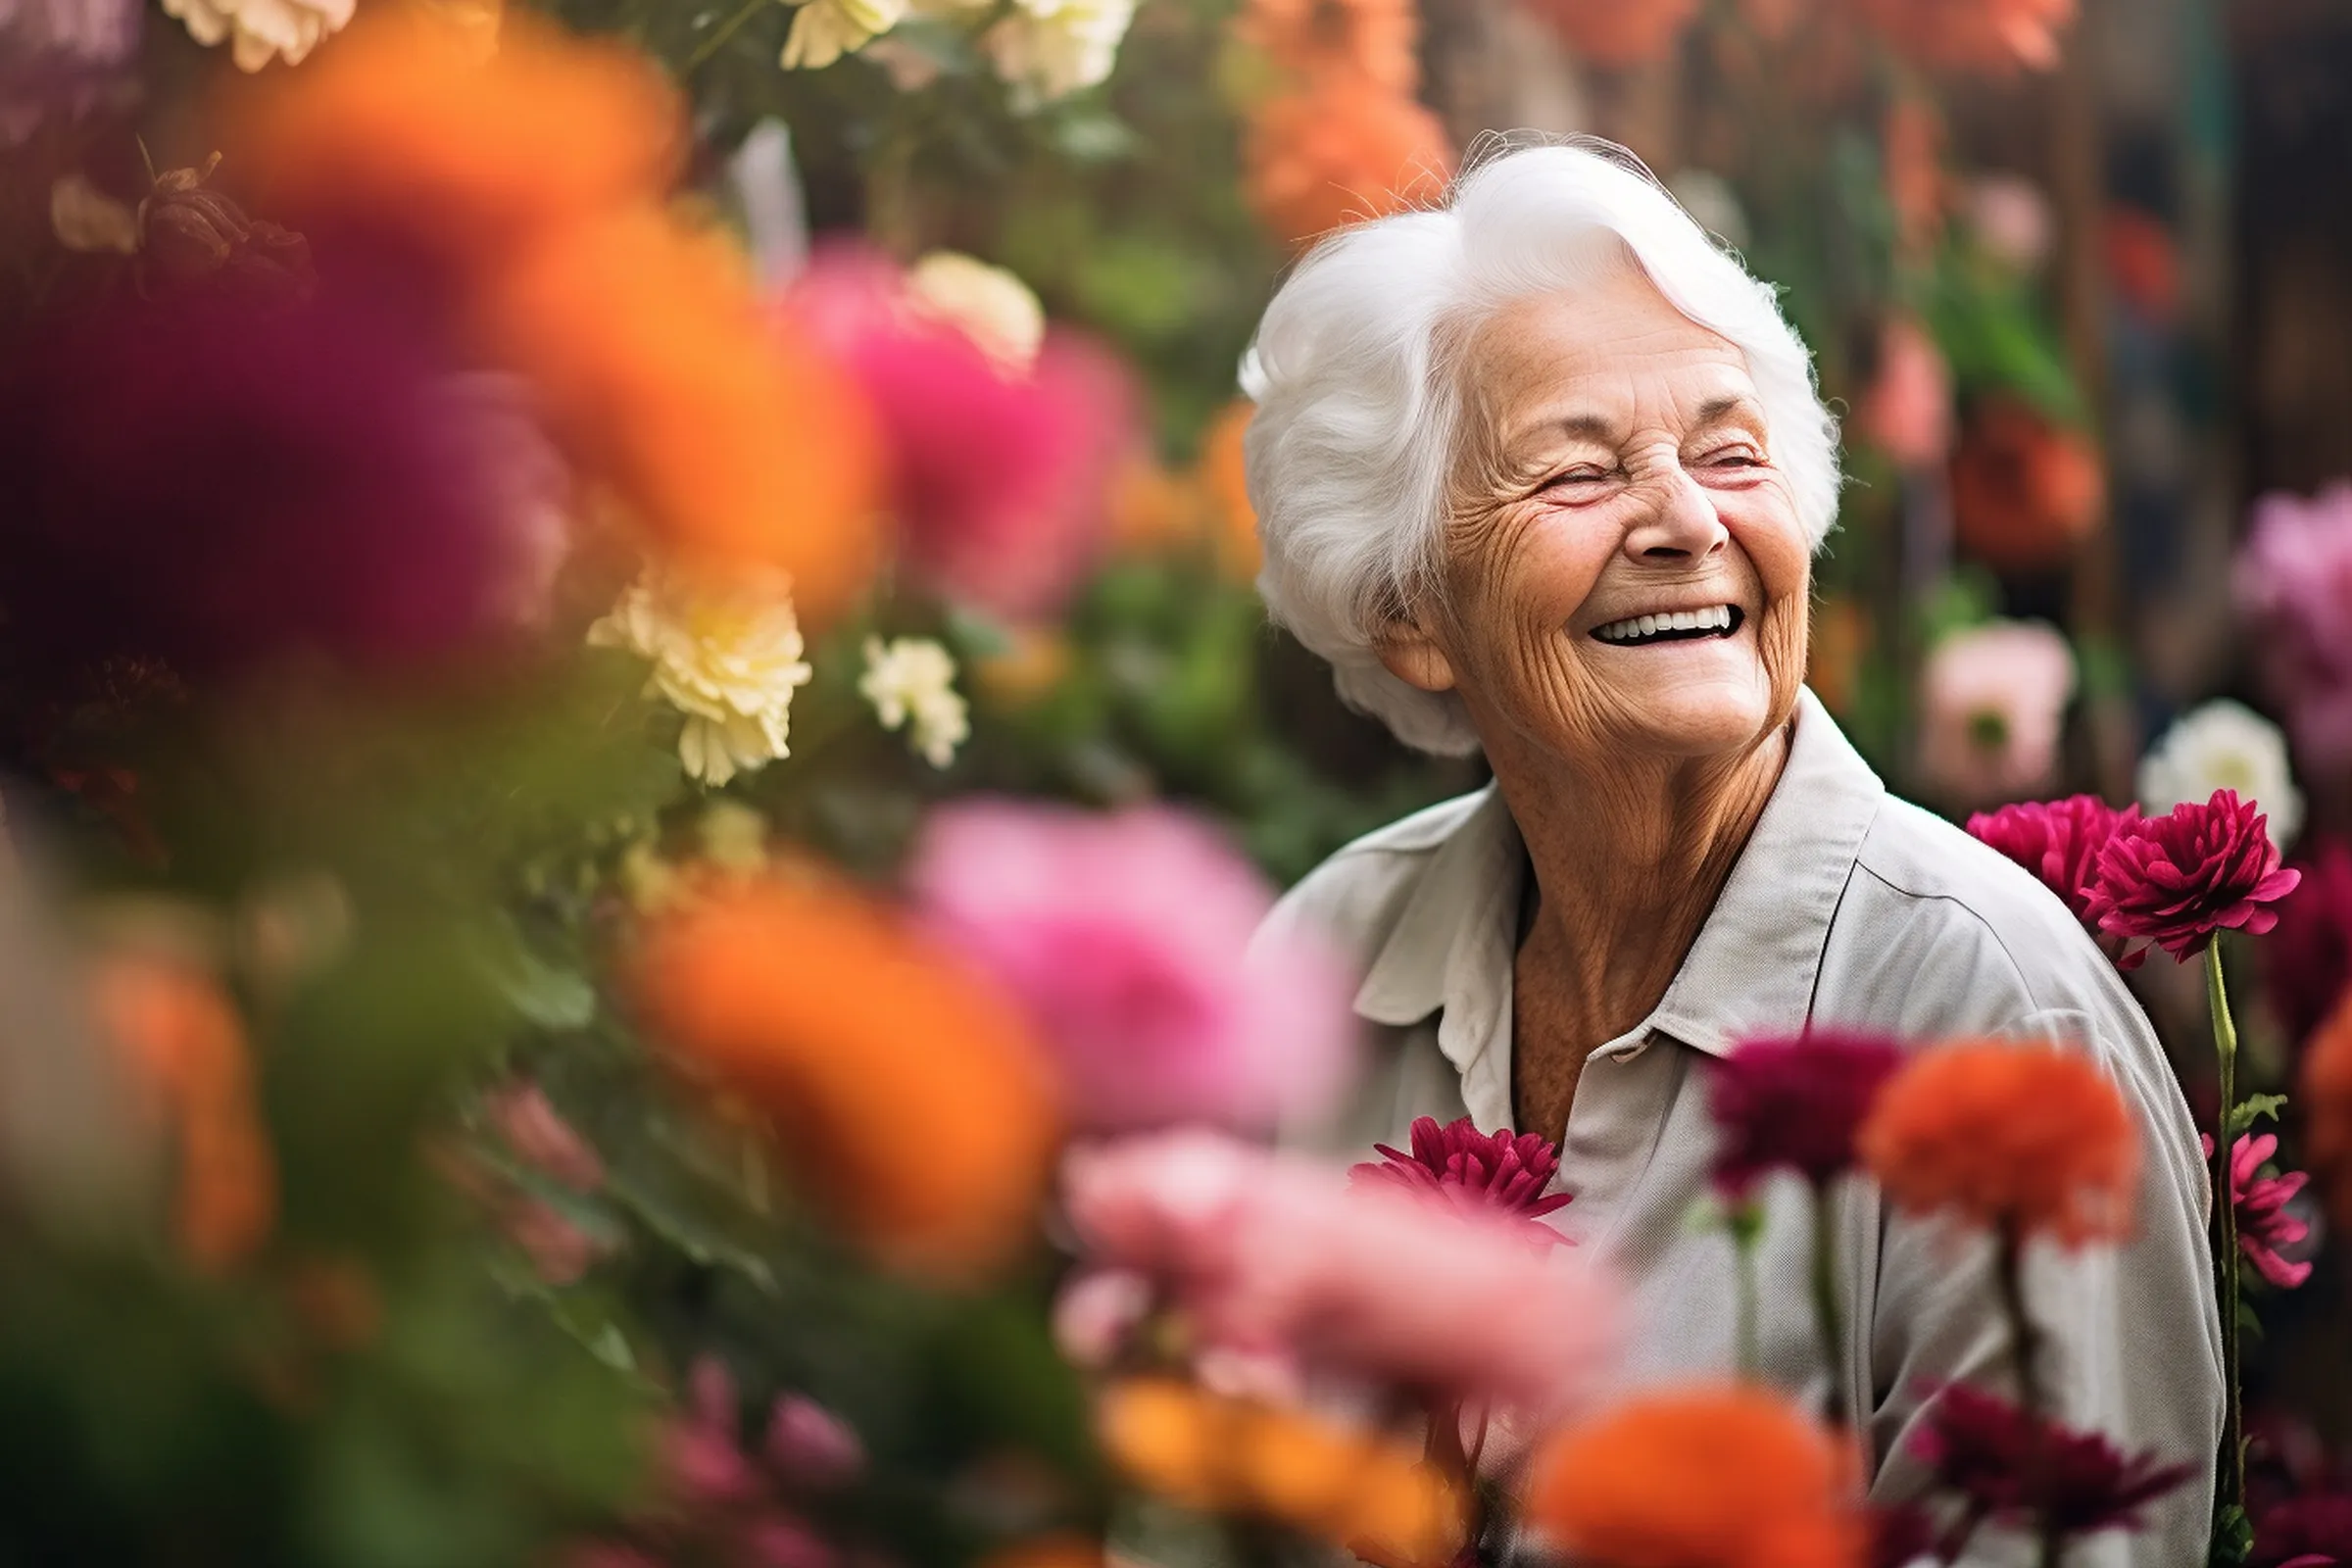 older woman smiling outside in garden surrounded by colorful flowers